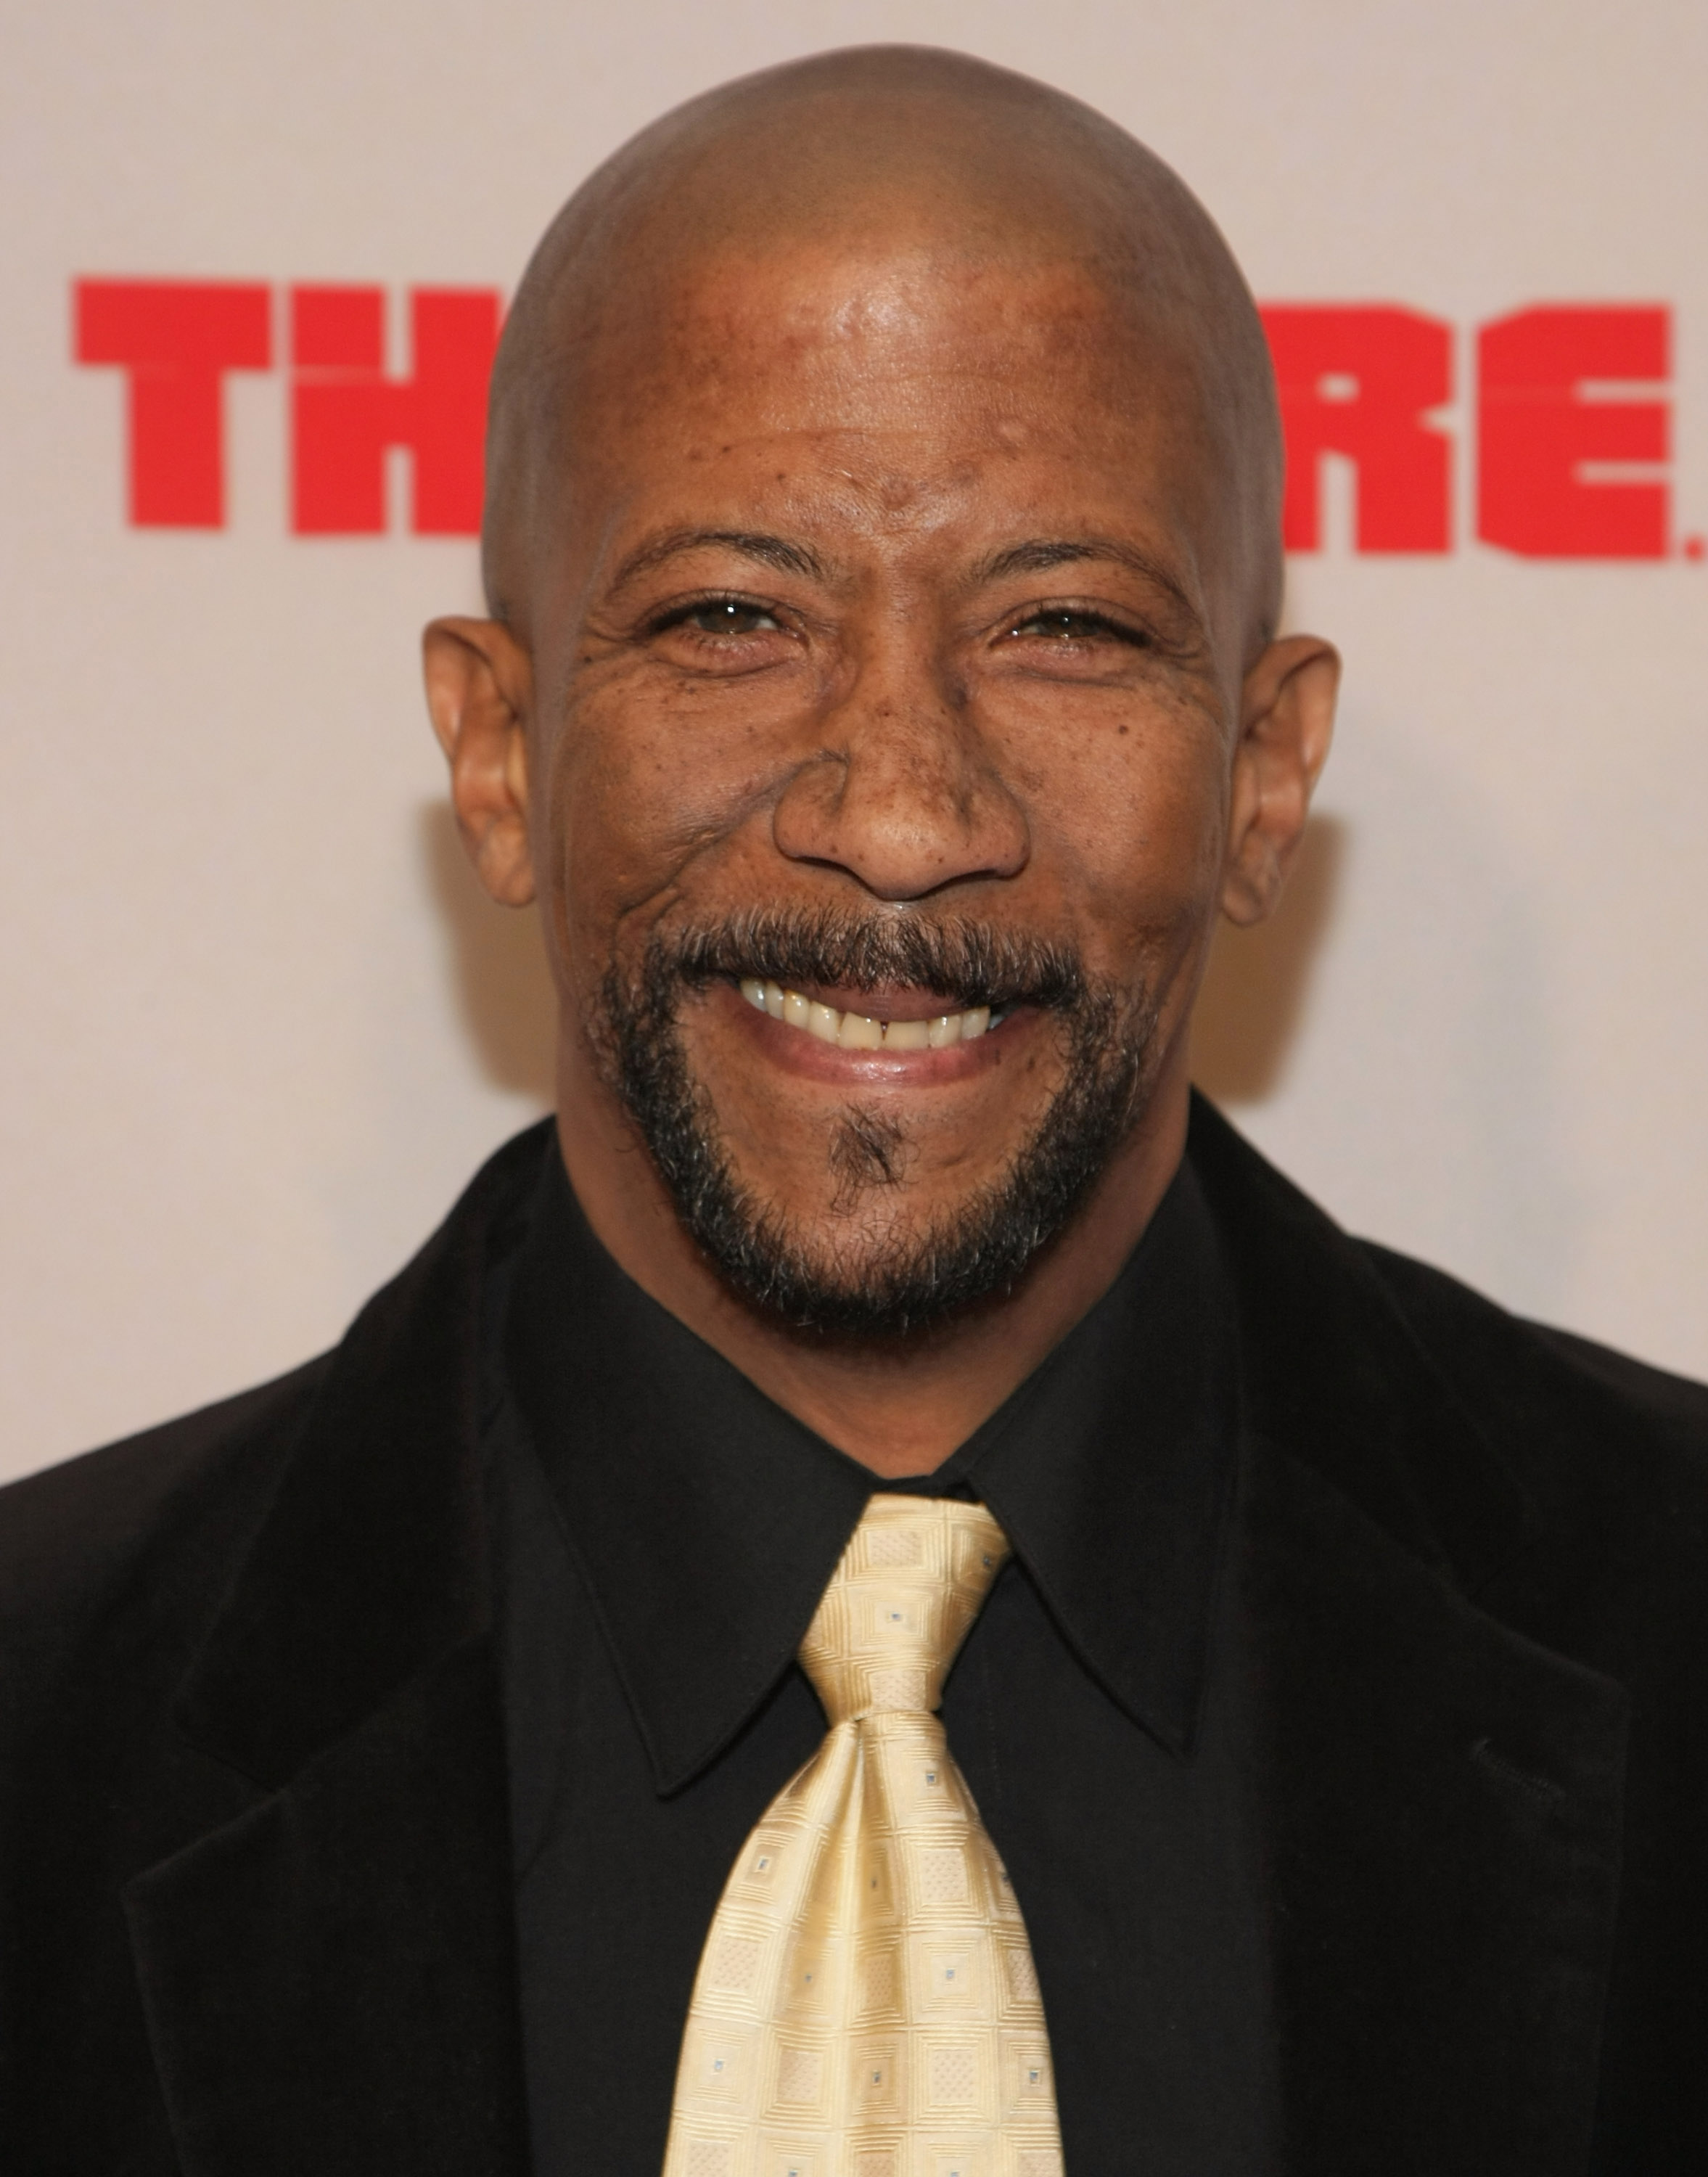 Reg E. Cathey arrives at the "The Wire" Season 5 Premiere at the Chelsea West Theater on Jan. 4, 2008 in New York City. (Dimitrios Kambouris--WireImage/Getty Images)